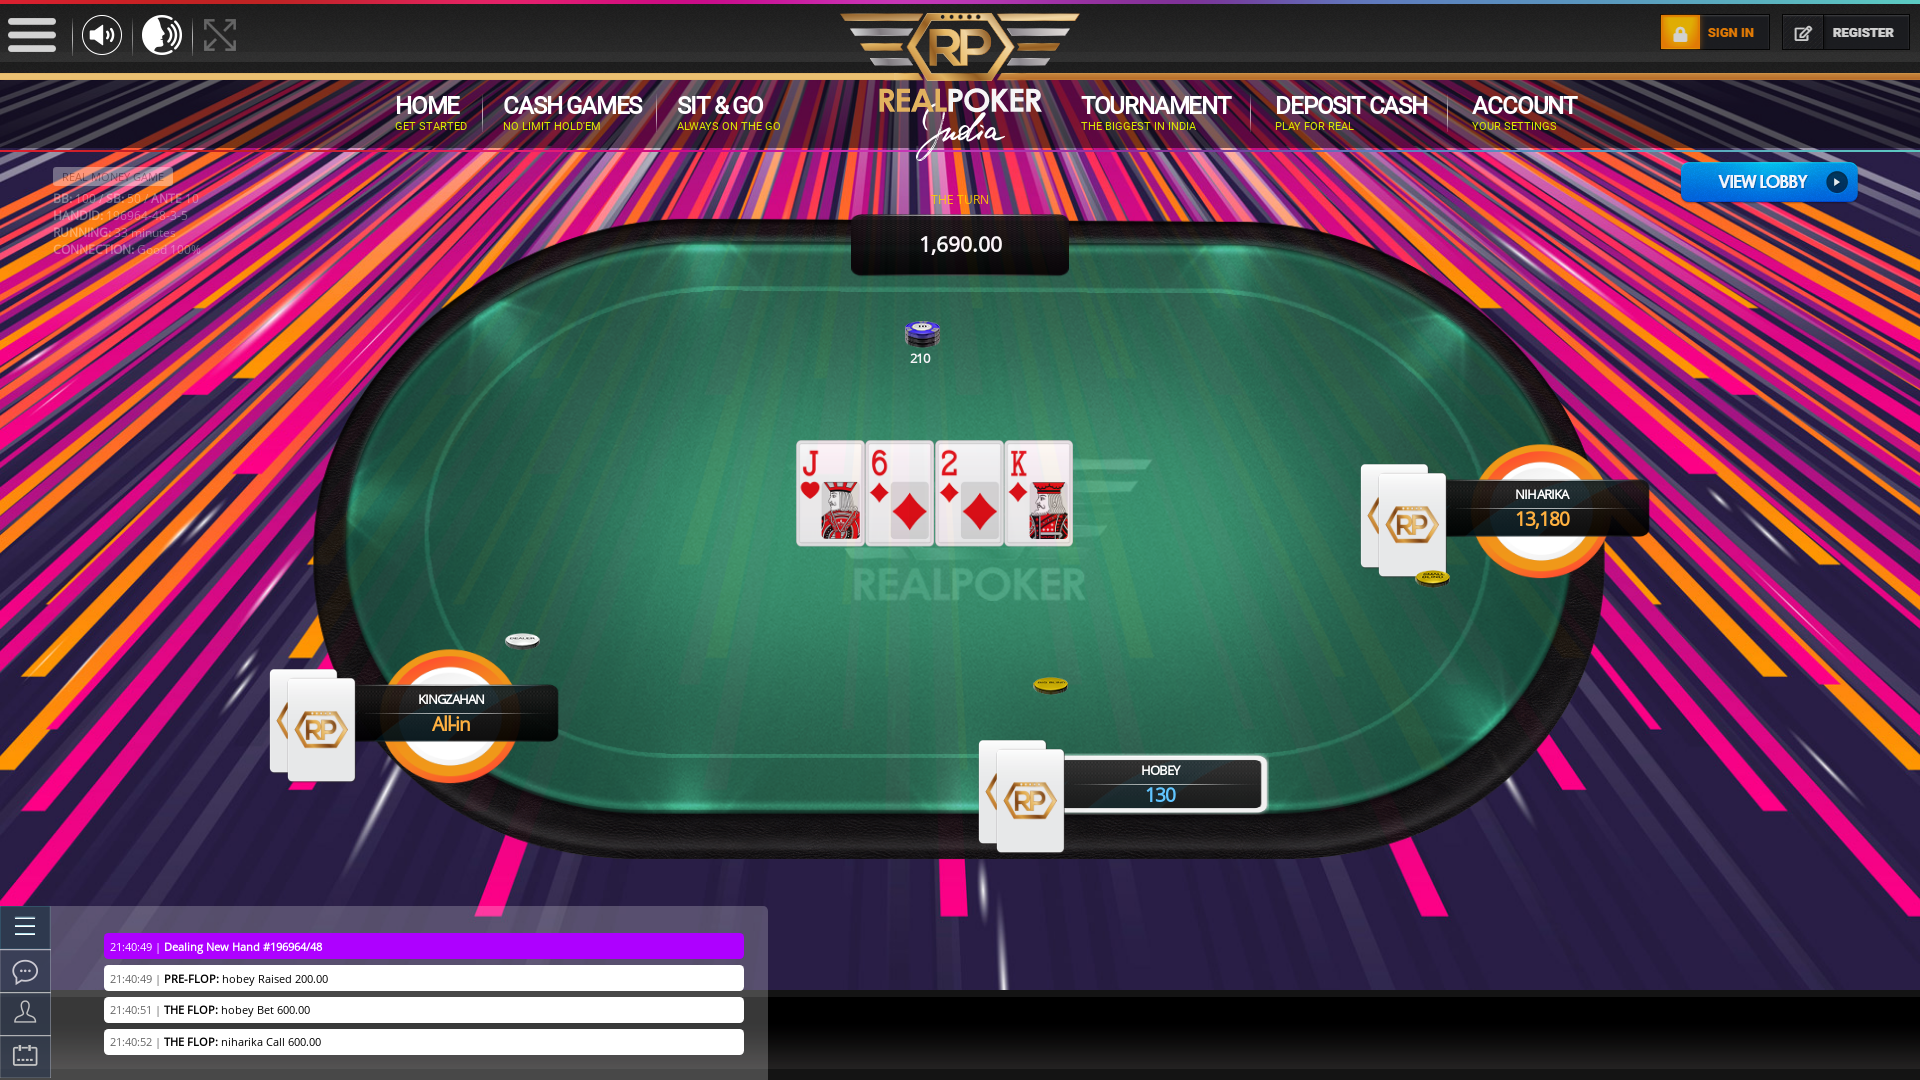 Online poker on a 10 player table in the 33rd minute match up